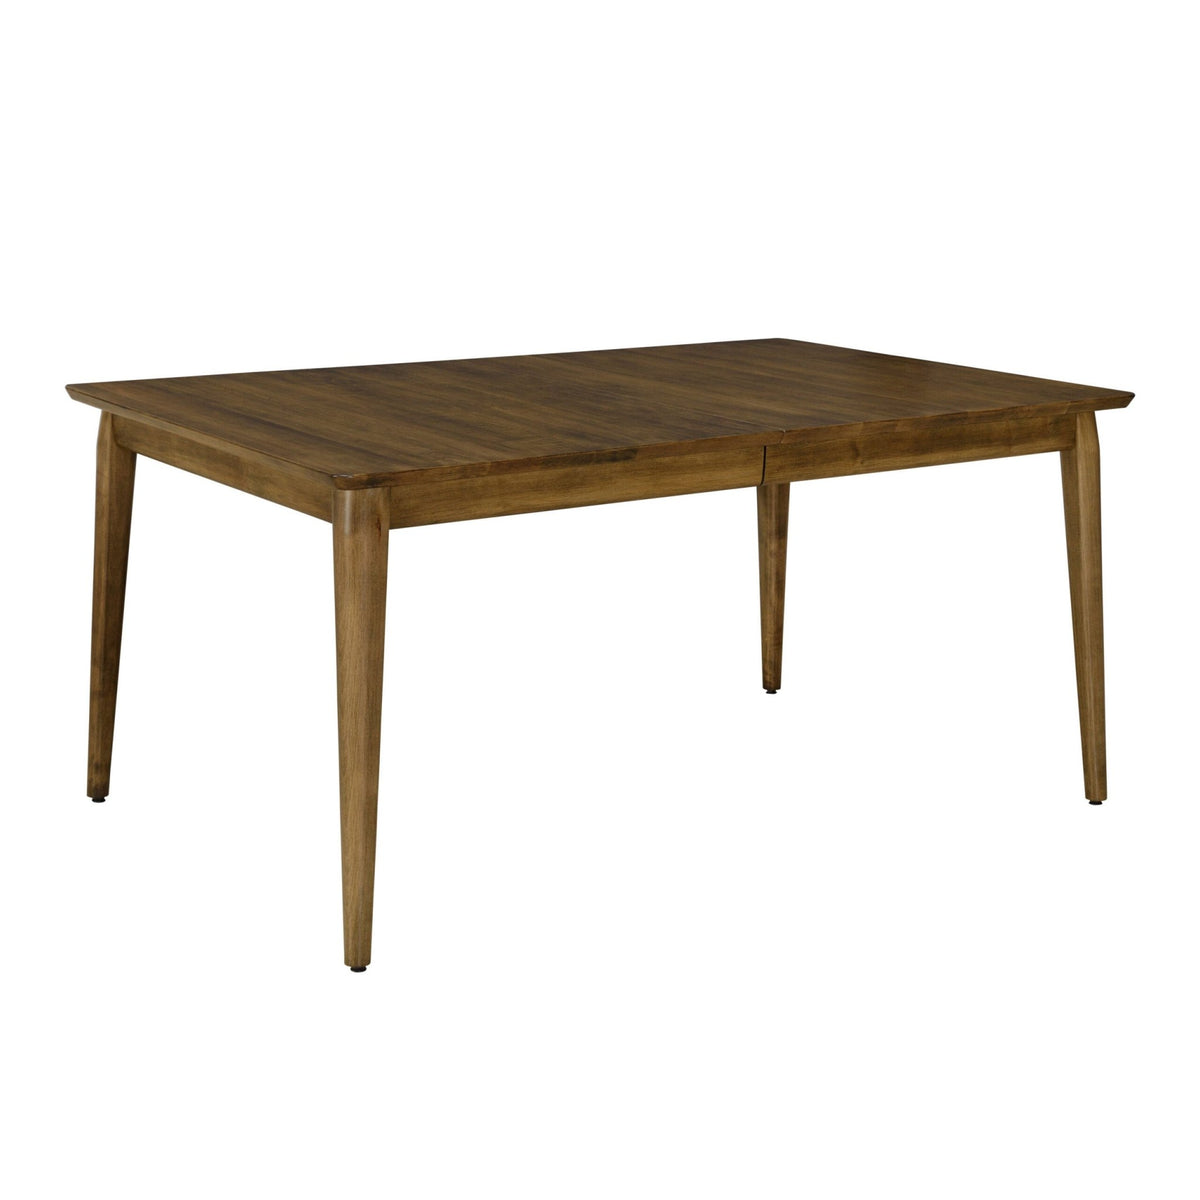 Amish Gamla Oval Extension Leg Table - snyders.furniture